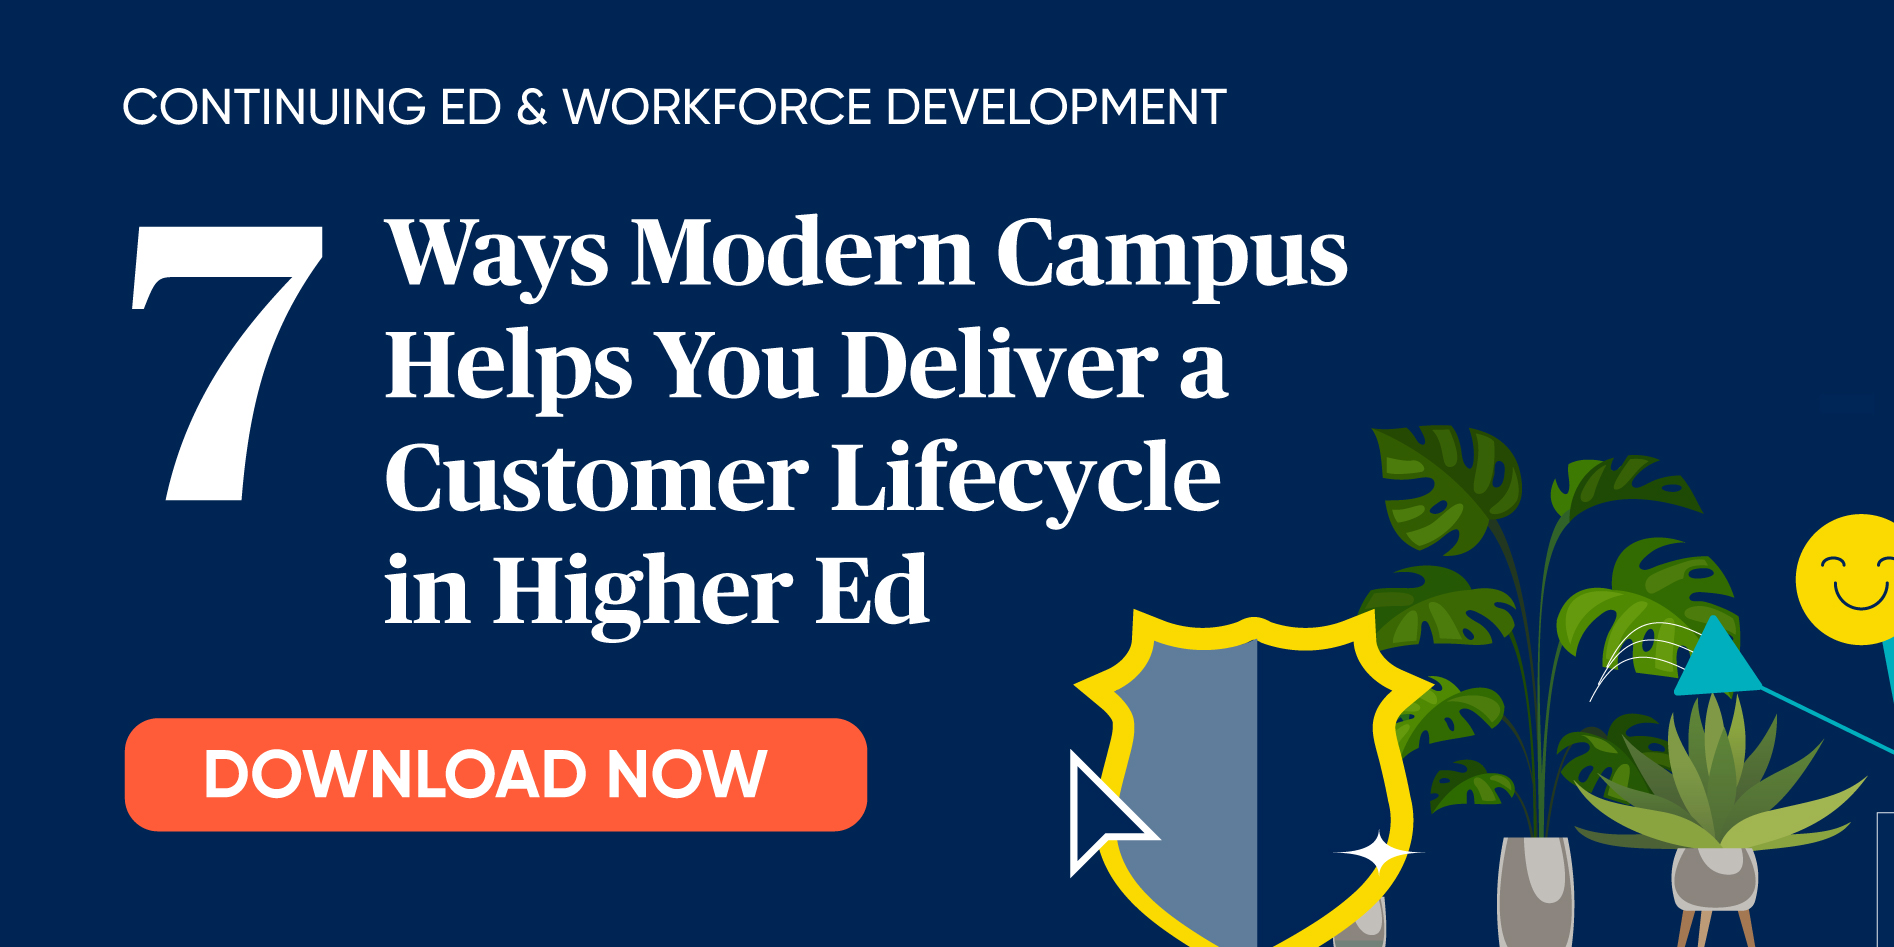 7 Ways Modern Campus Helps You Deliver a Customer Lifecycle in Higher Ed